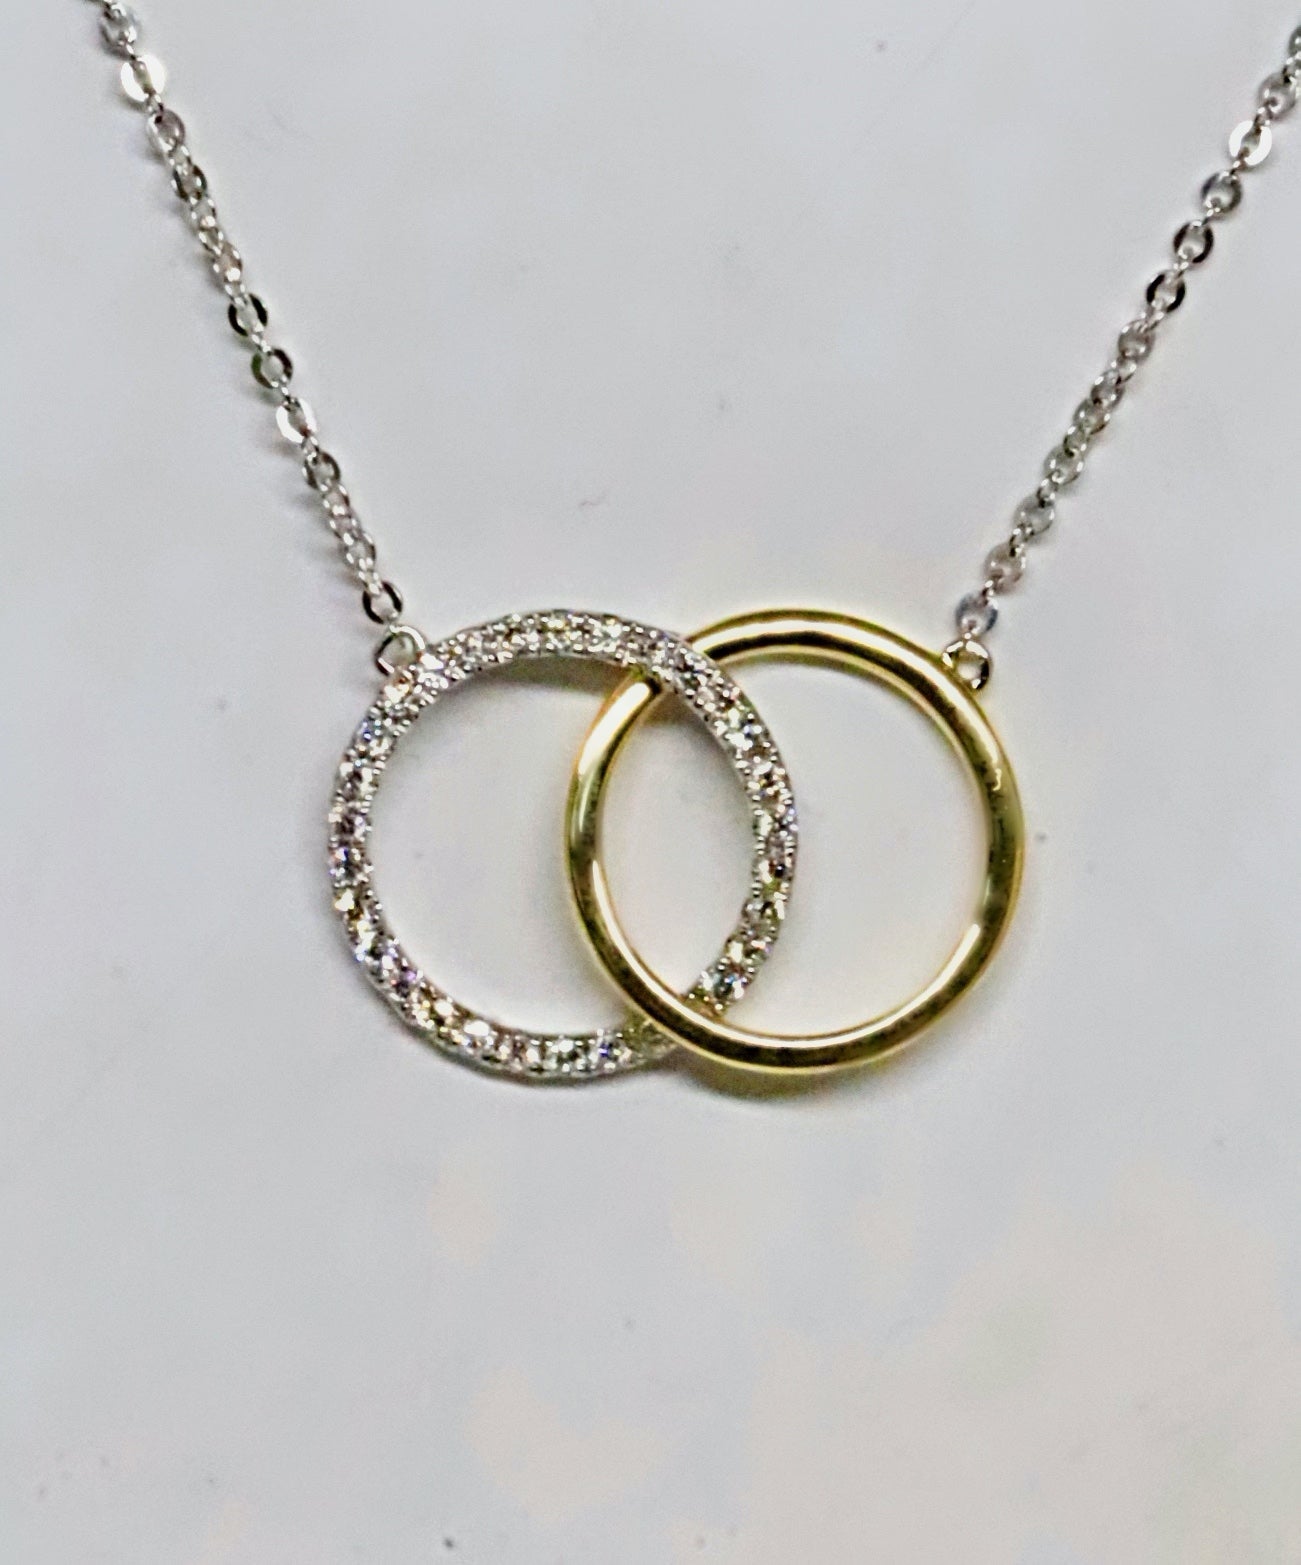 Circle Necklace, Twentieth Birthday Gift for Women, Two Tone Necklace, 14k  Sterling Silver Pendant, Interlocking Circle Necklace